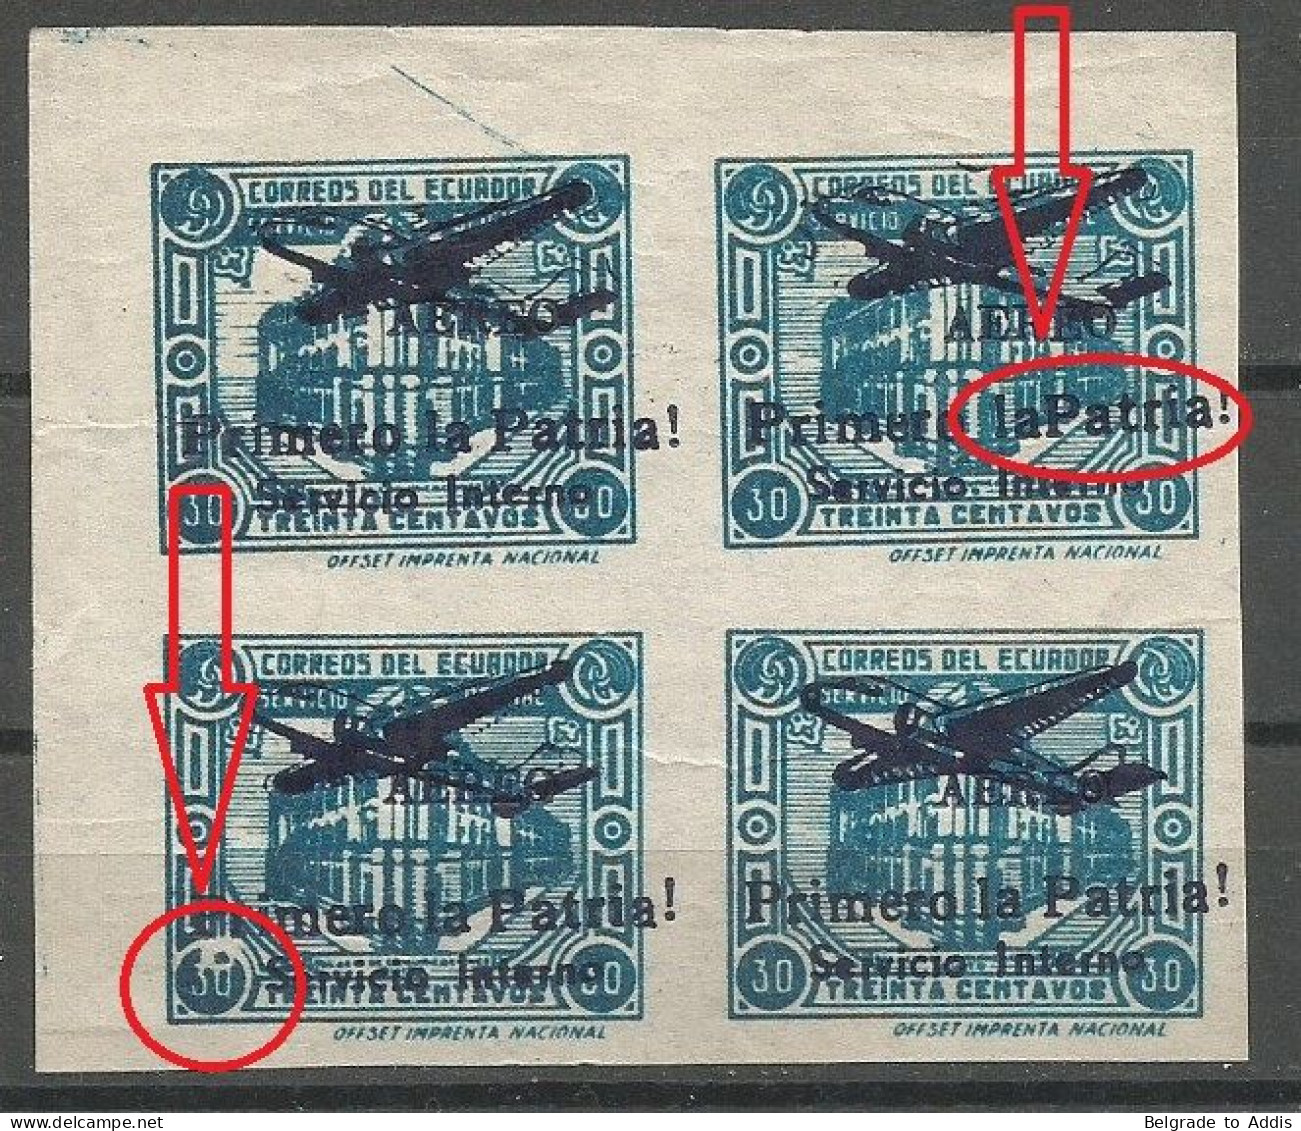 Ecuador Sanabria 207e Airmail 1947 IMPERFORATED Block Of 4 MNG Ith Plate Flaw In Overprint "LaPatria" + "Circle" On 30 - Ecuador